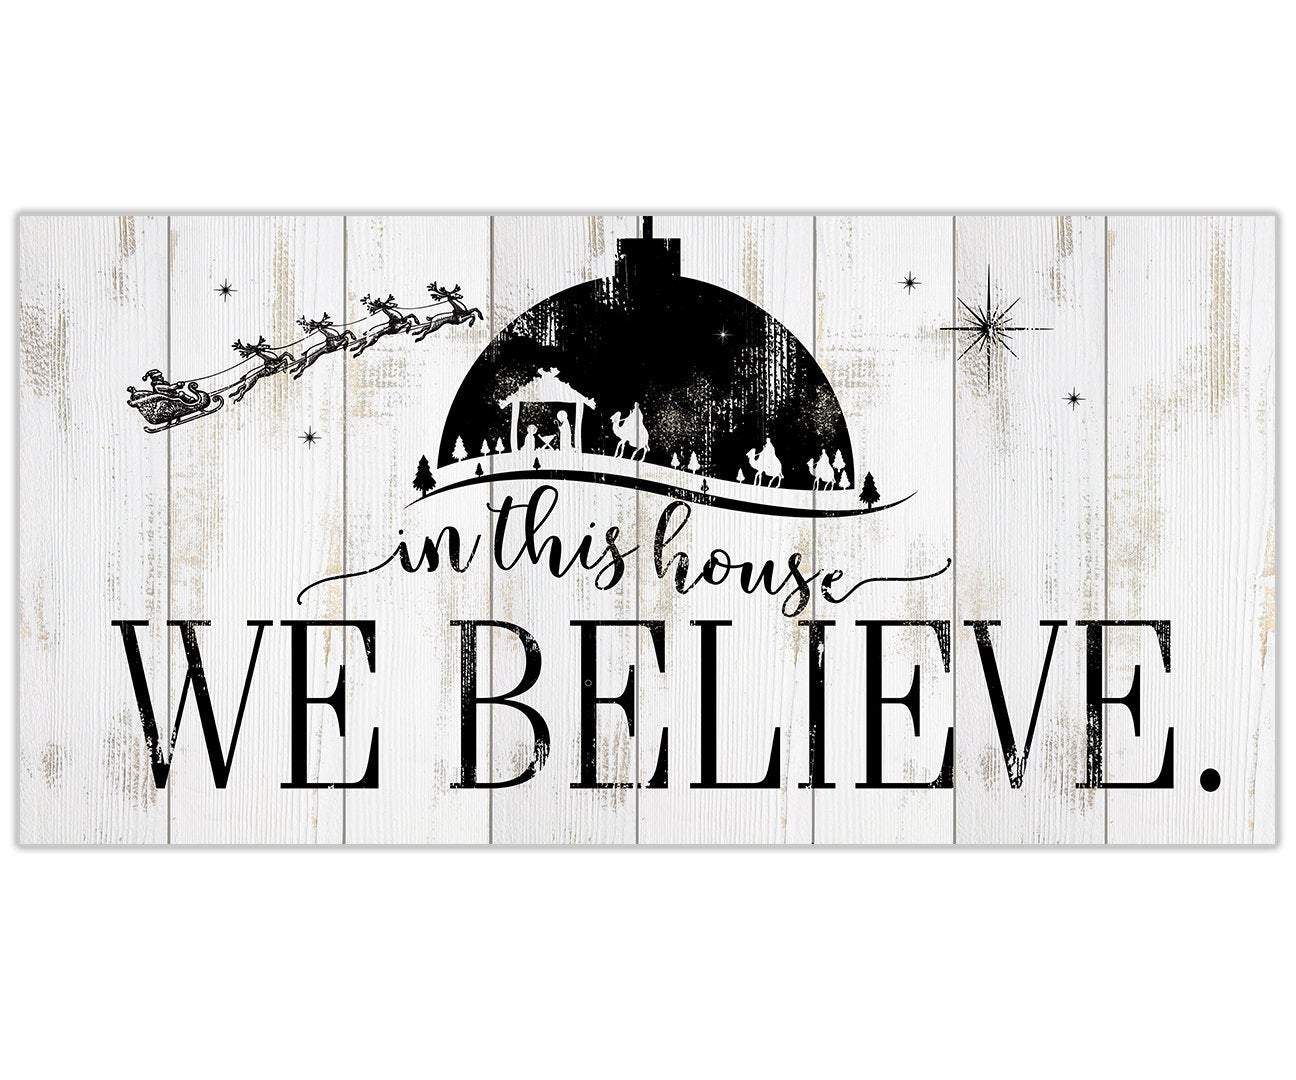 In This House We Believe - Canvas | Lone Star Art.